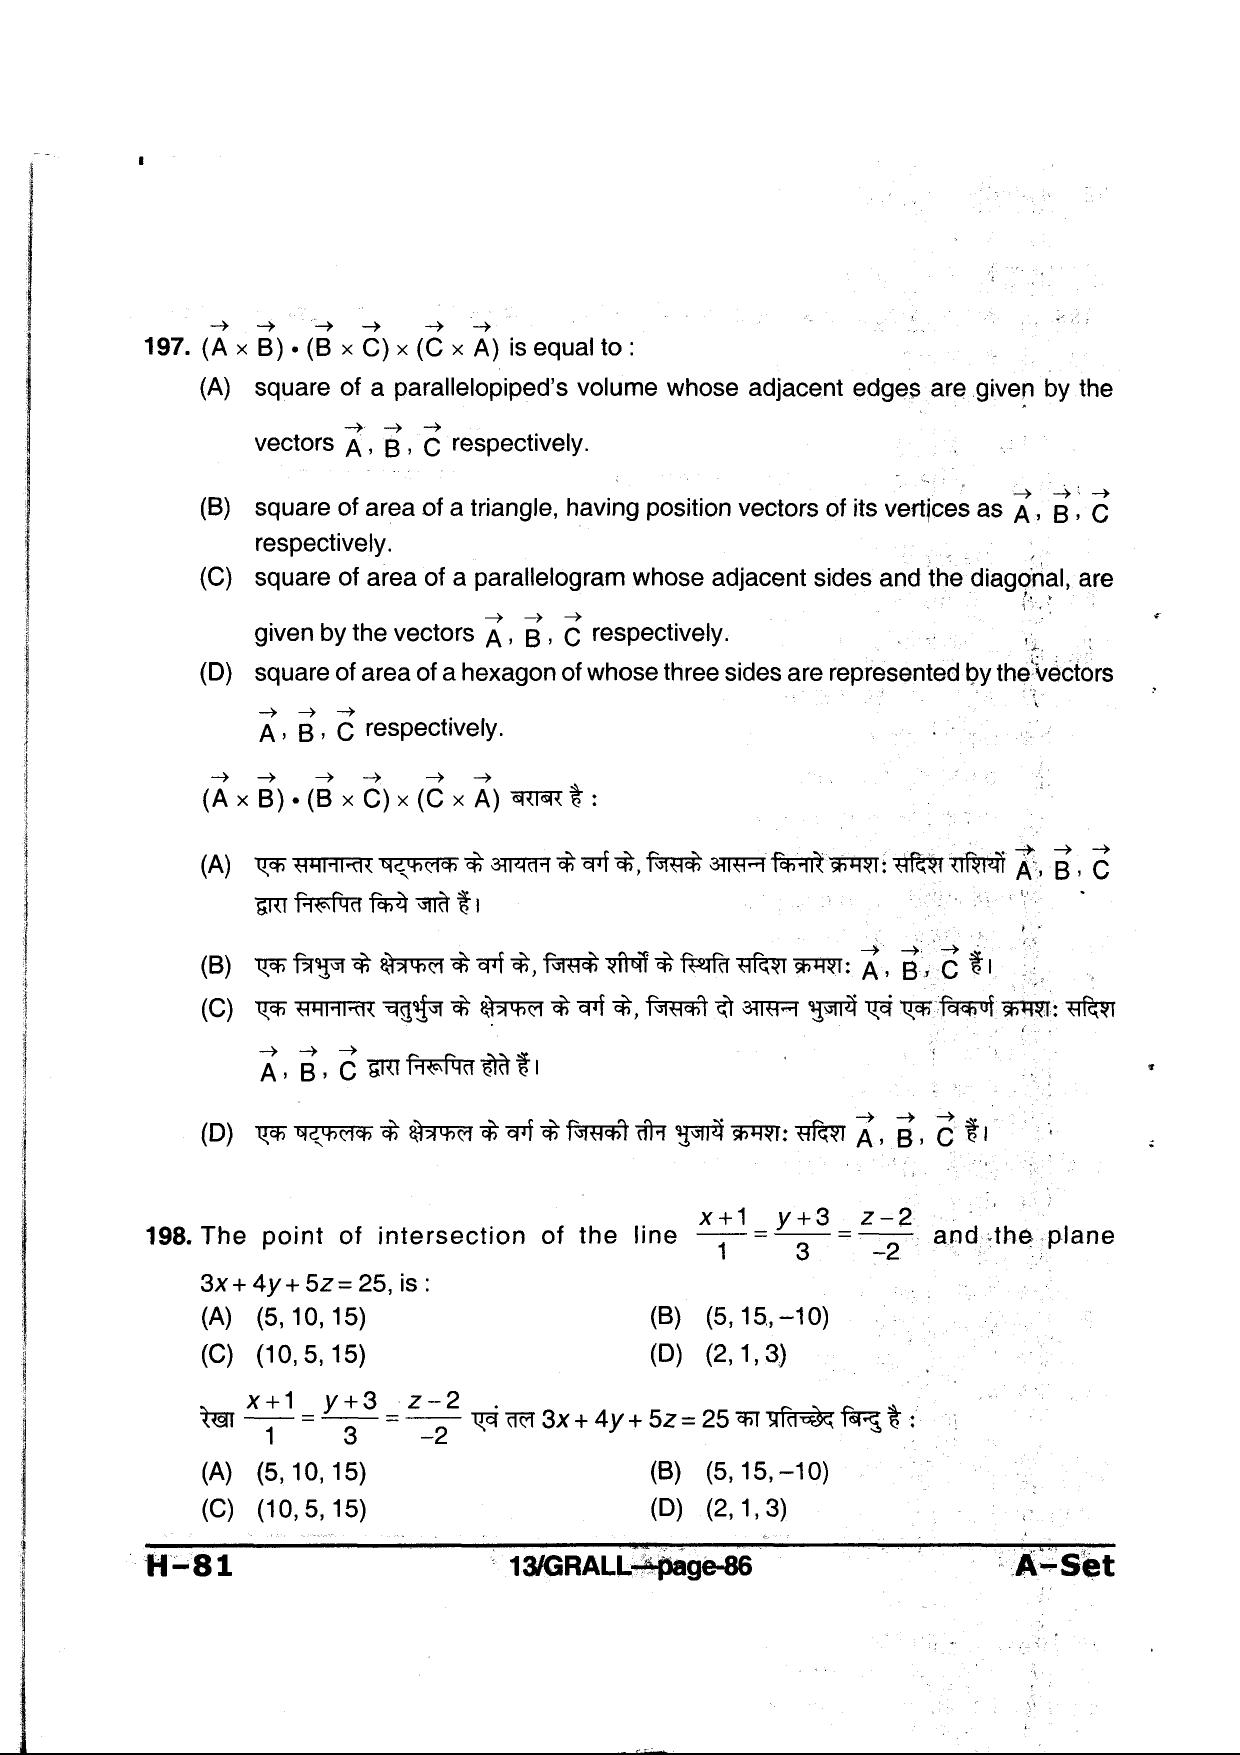 MP PAT 2013 Question Paper - Paper I - Page 86